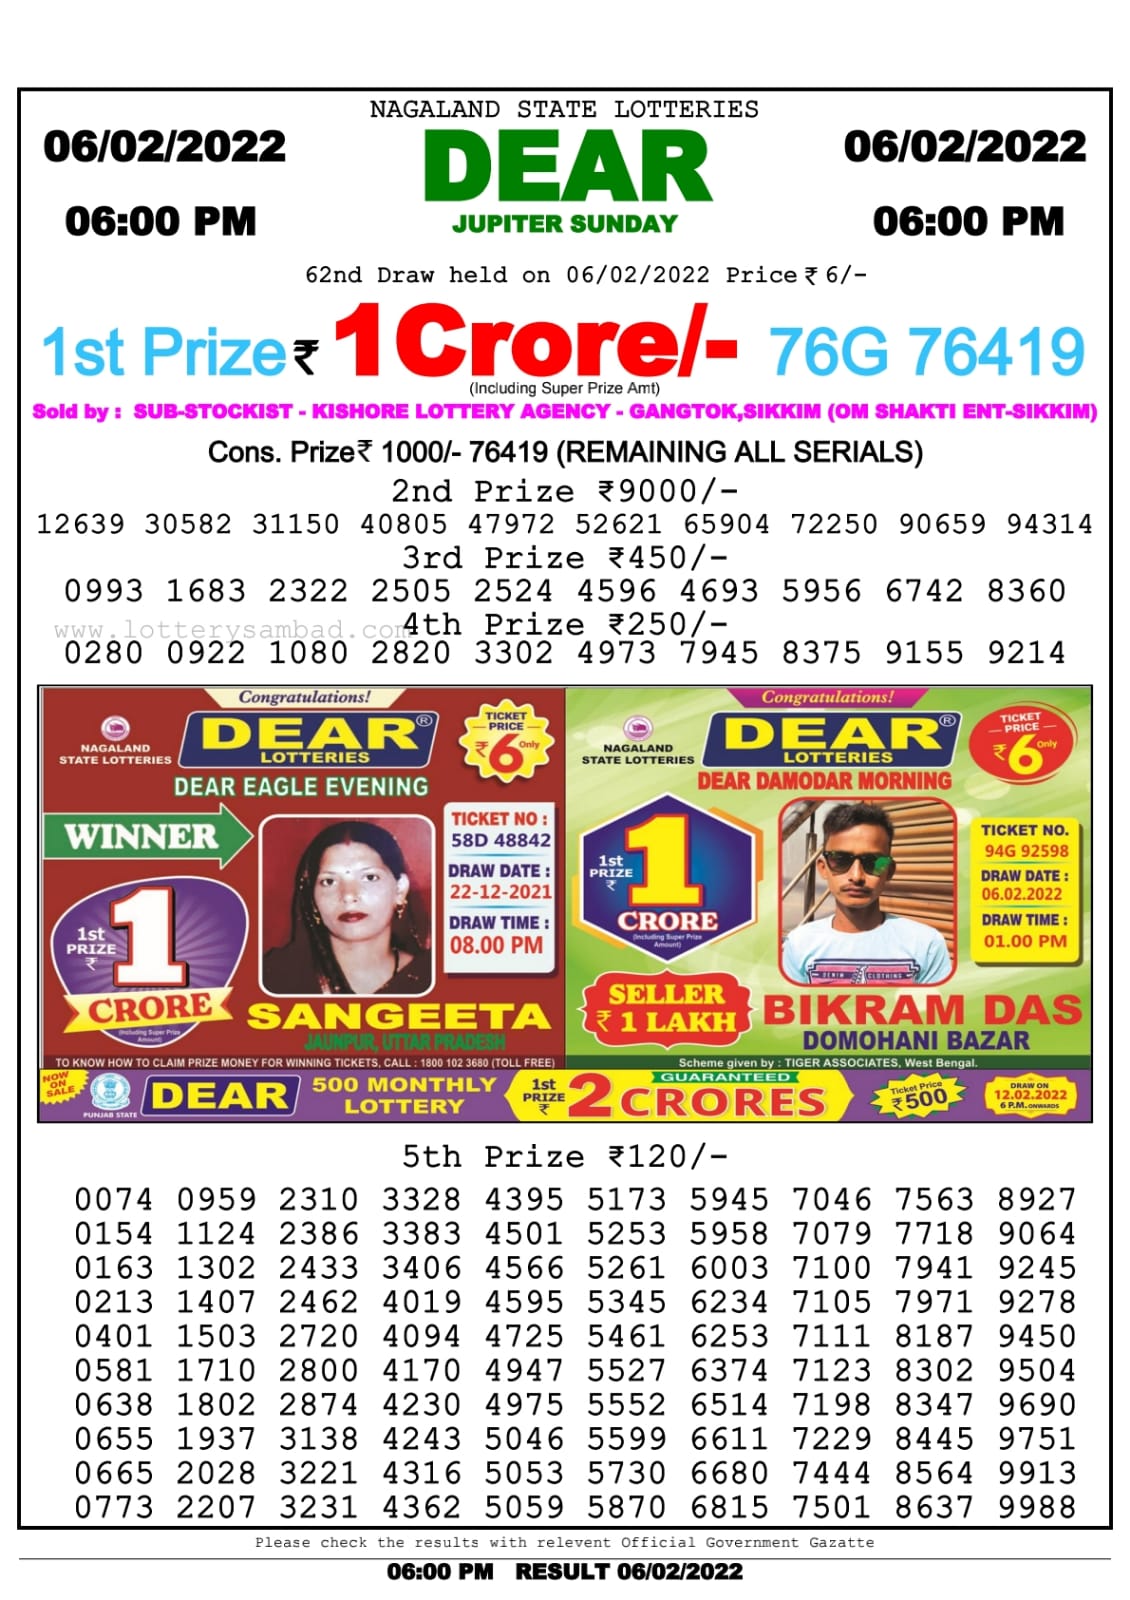 Dear Lottery Nagaland state Lottery Results 6.00 PM 06.02.2022